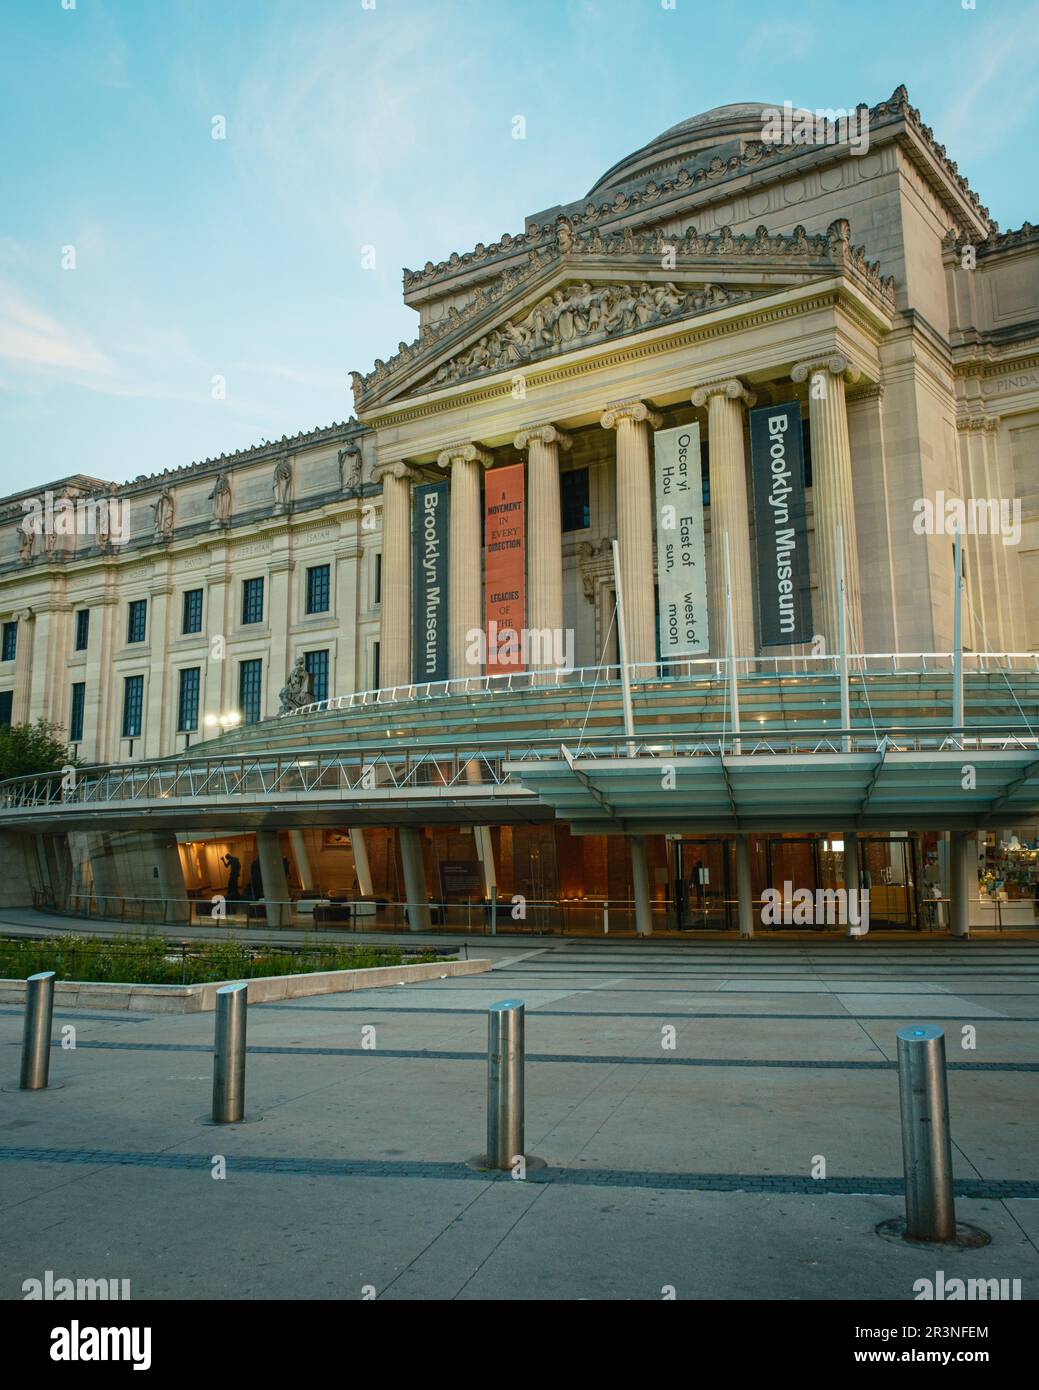 The exterior of the Brooklyn Museum, Brooklyn, New York Stock Photo